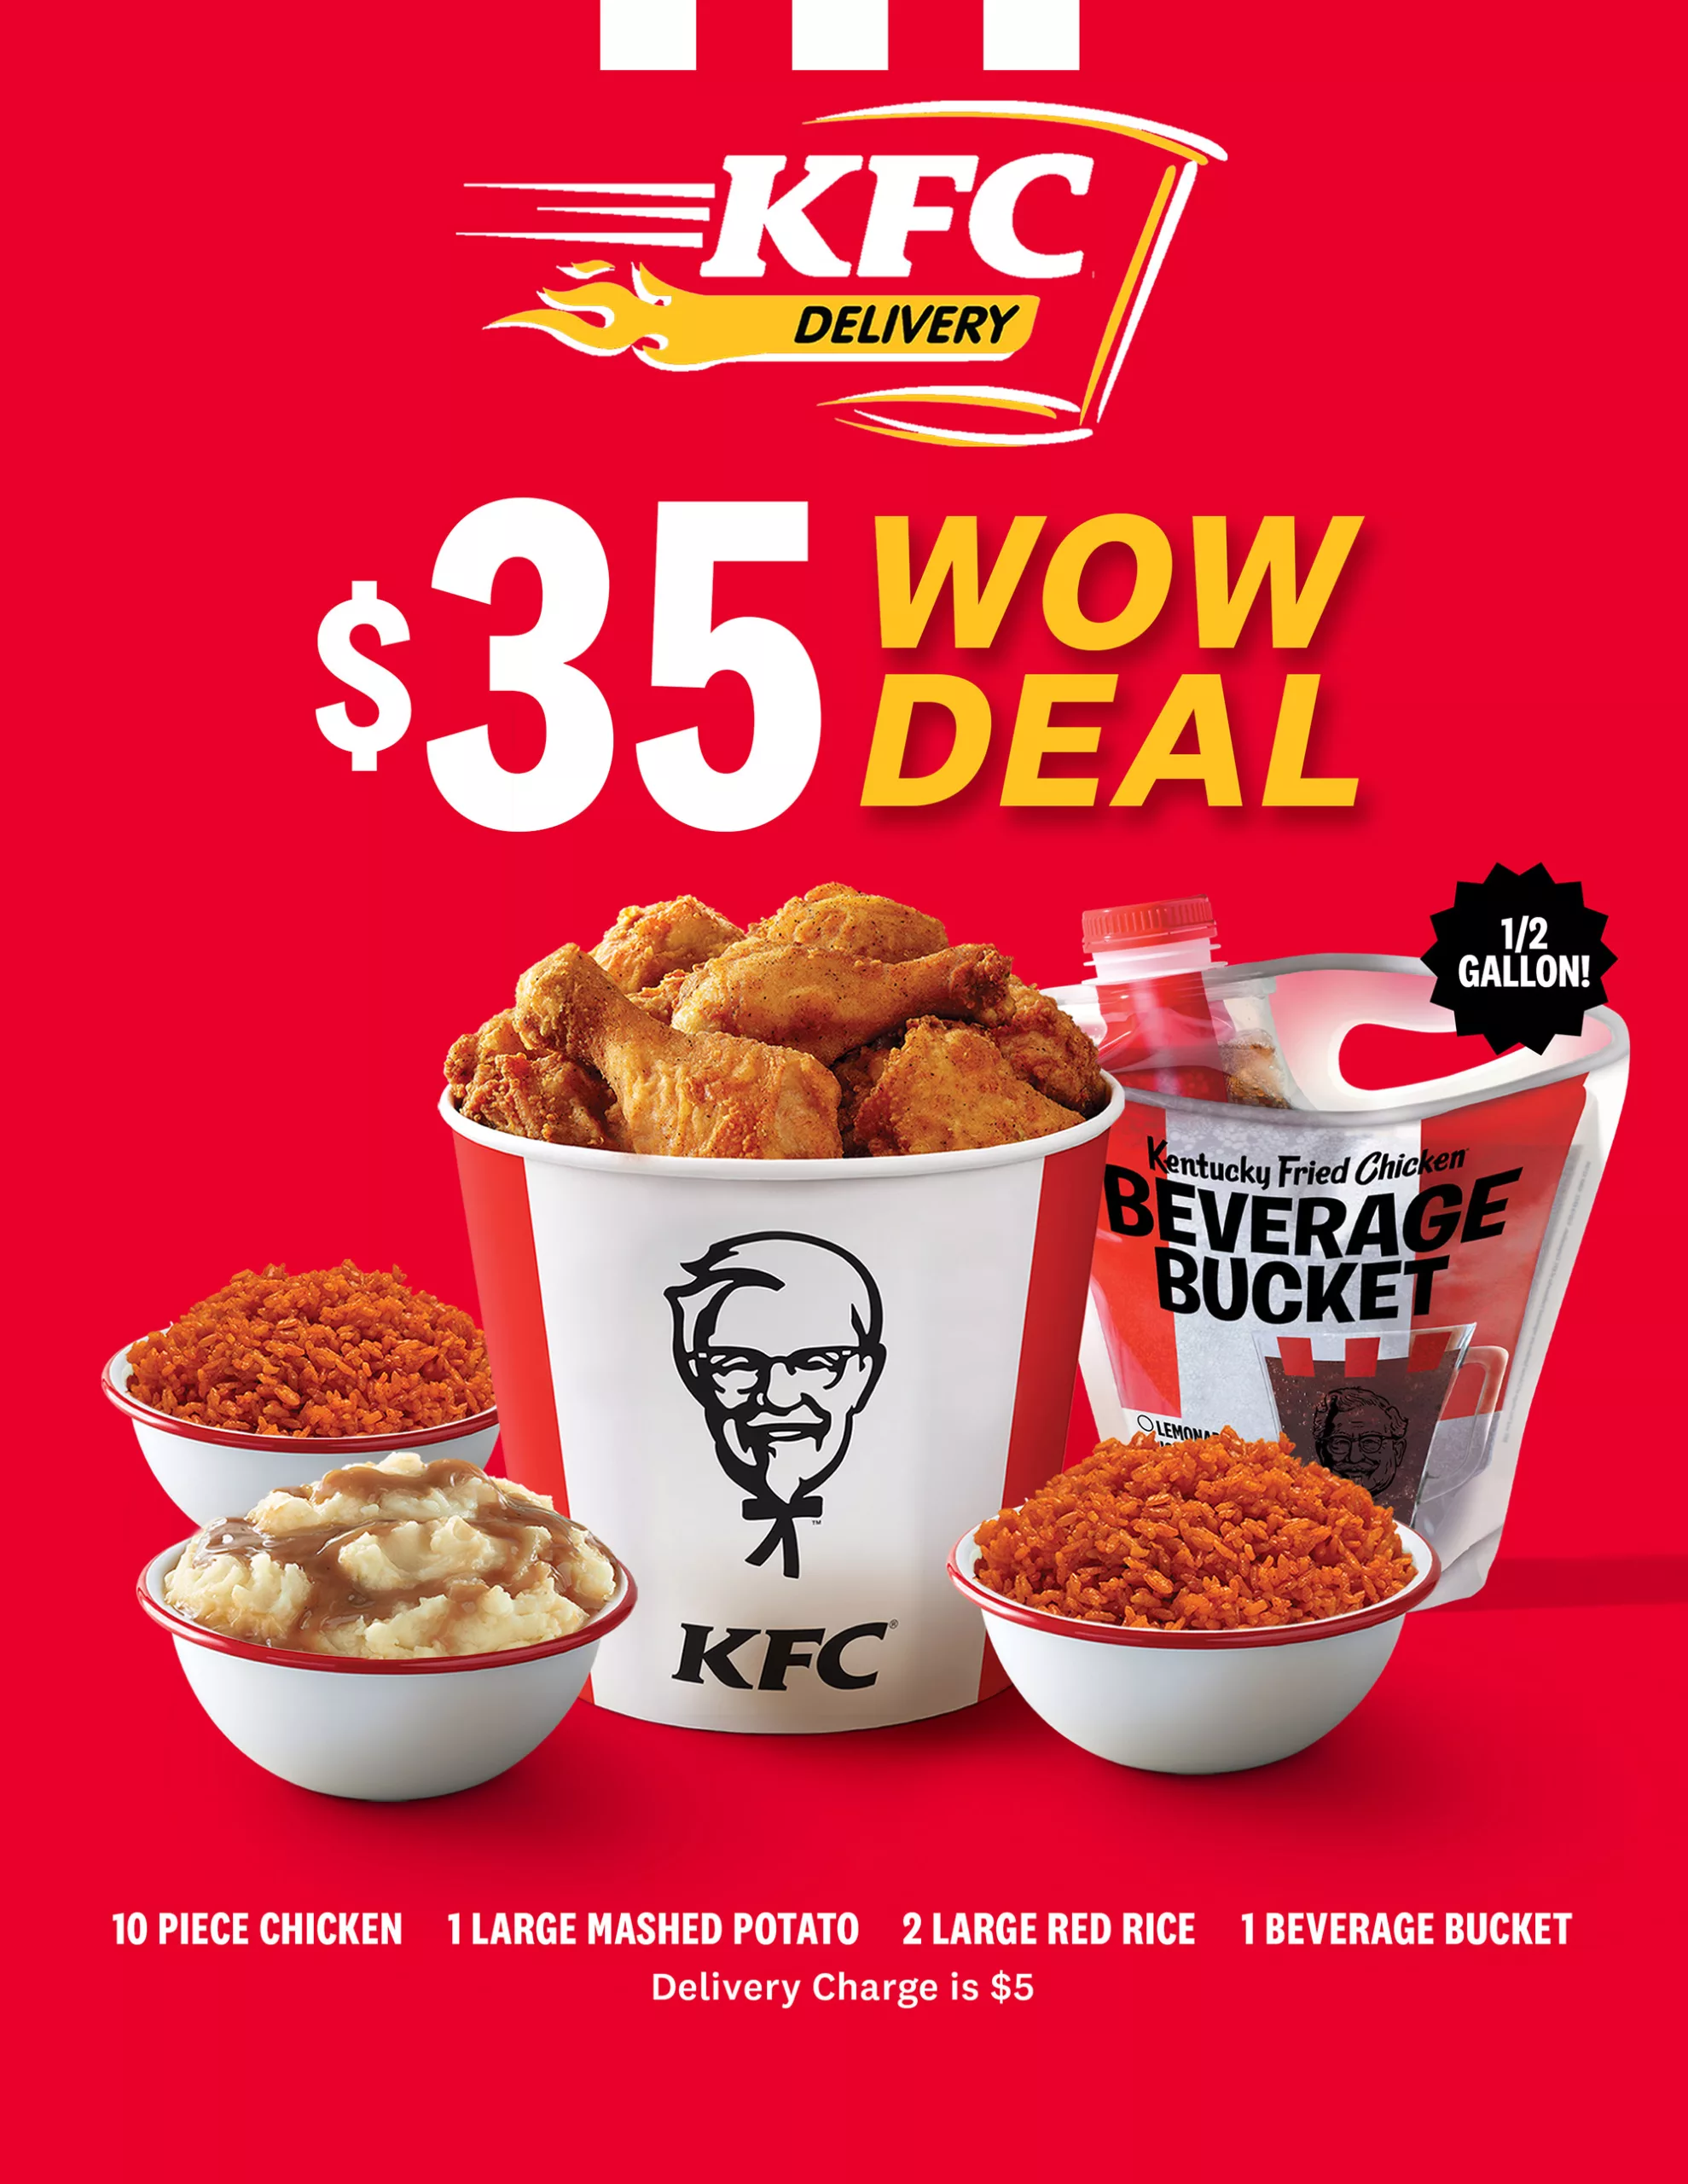 KFC DELIVERY INSERT (FRONT)